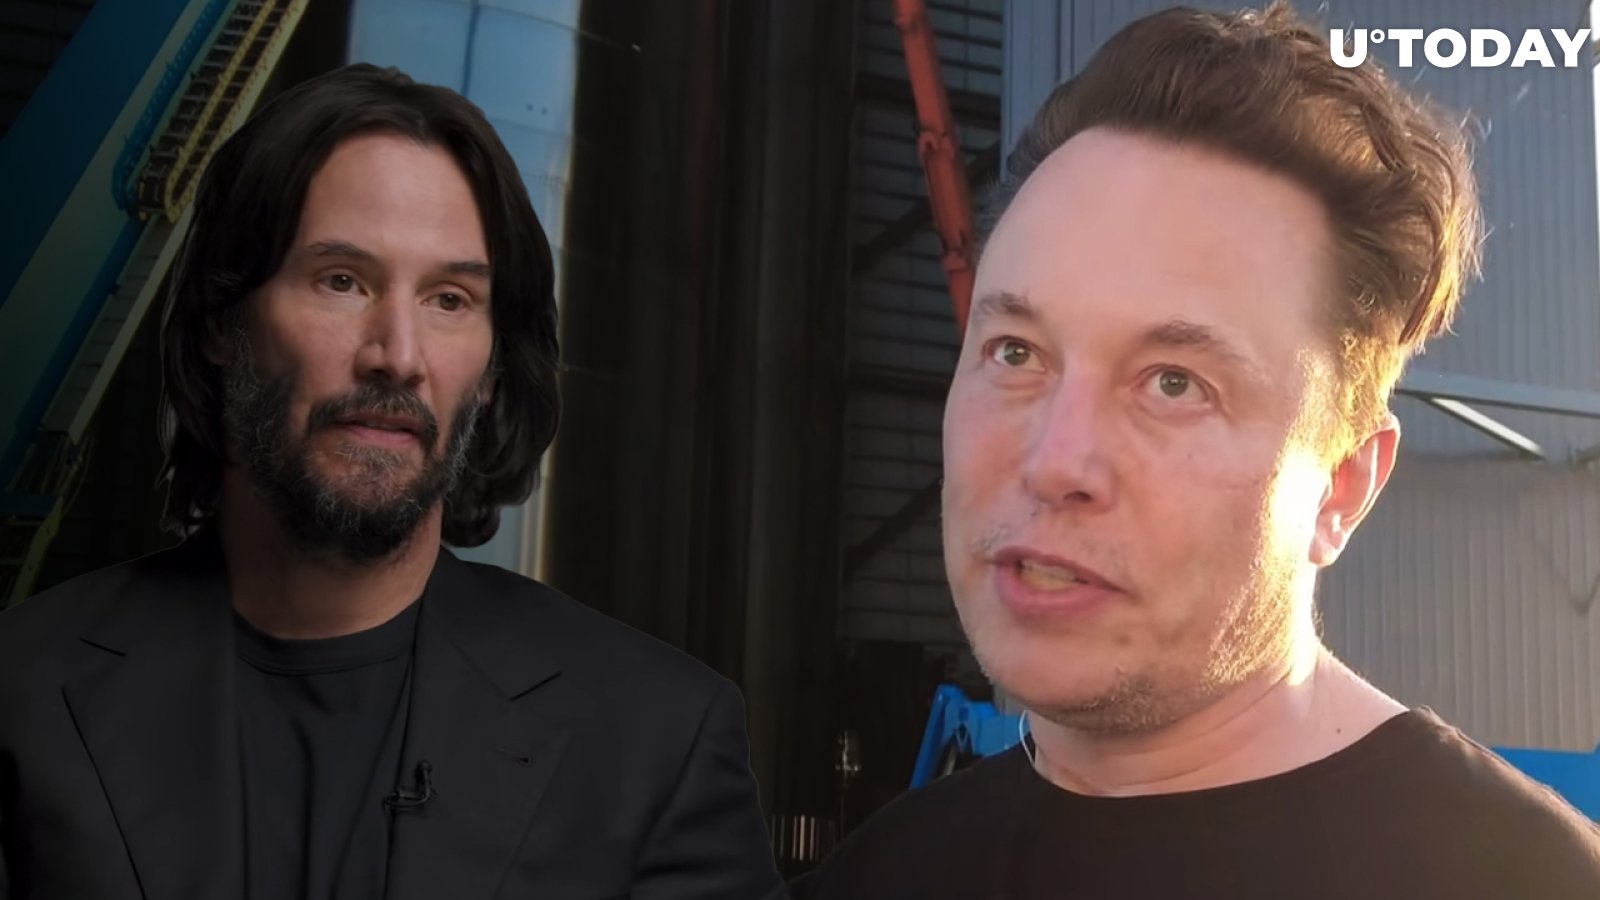 Elon Musk Posts Meme About "Imaginary" NFTs, Is He Hinting at Keanu Reeves' Recent Interview?